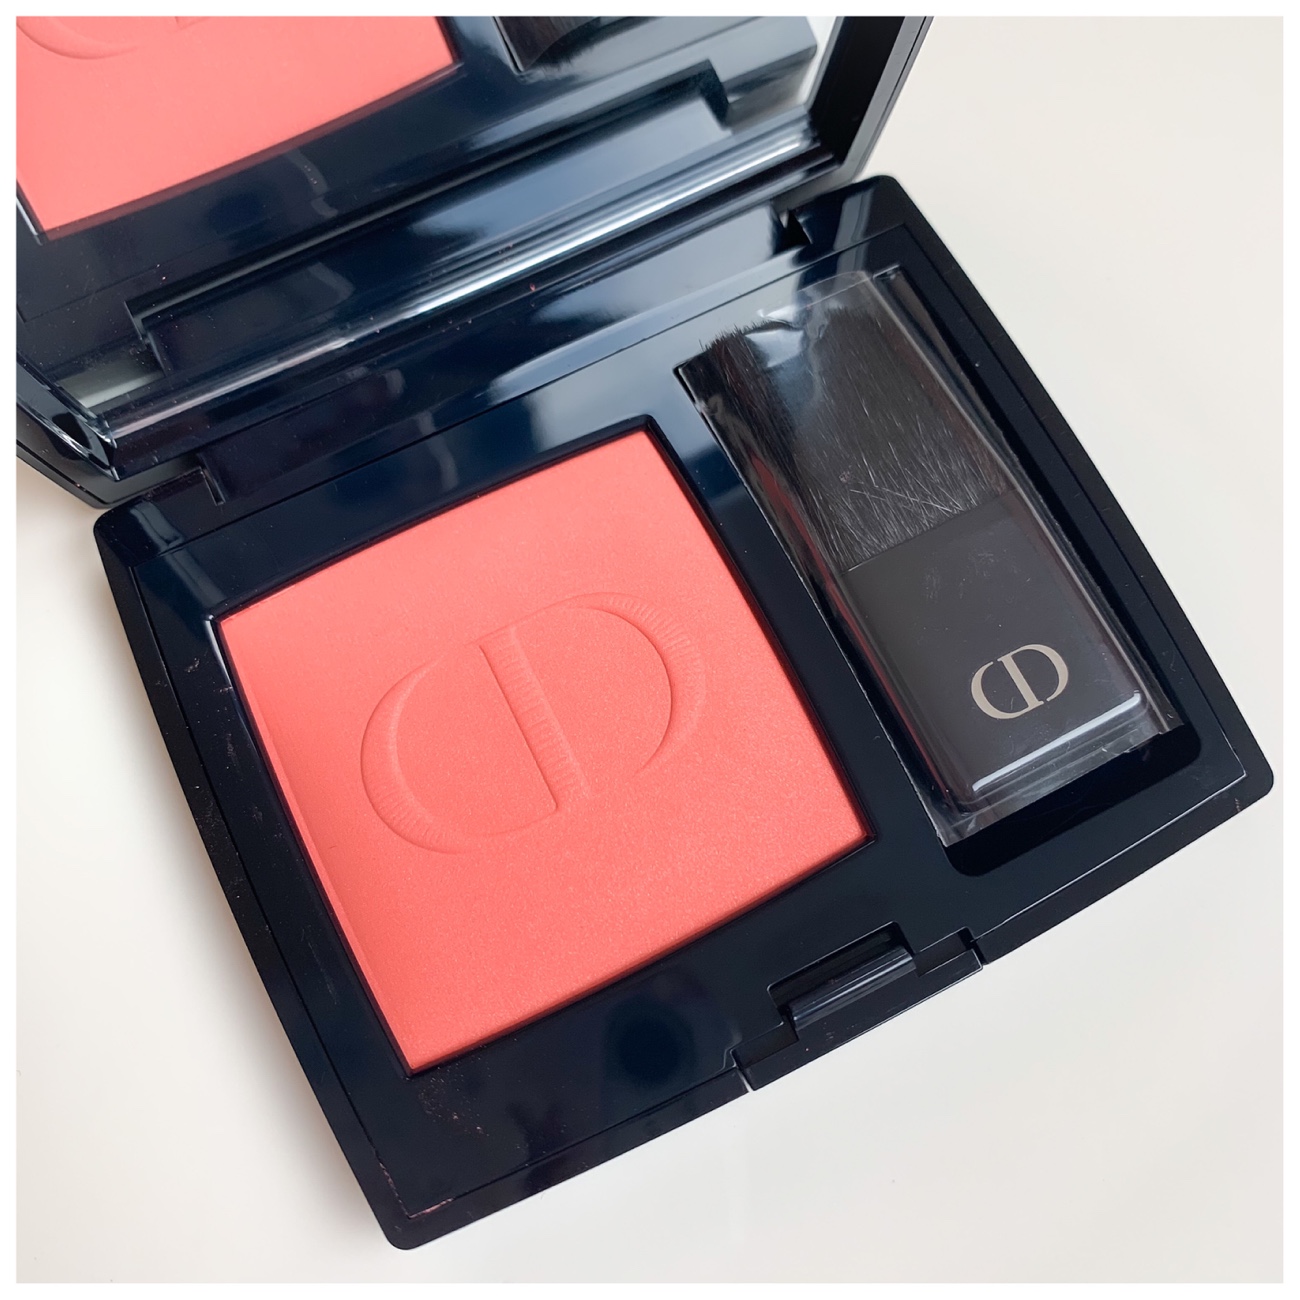 My first Diorskin Rouge Blush review